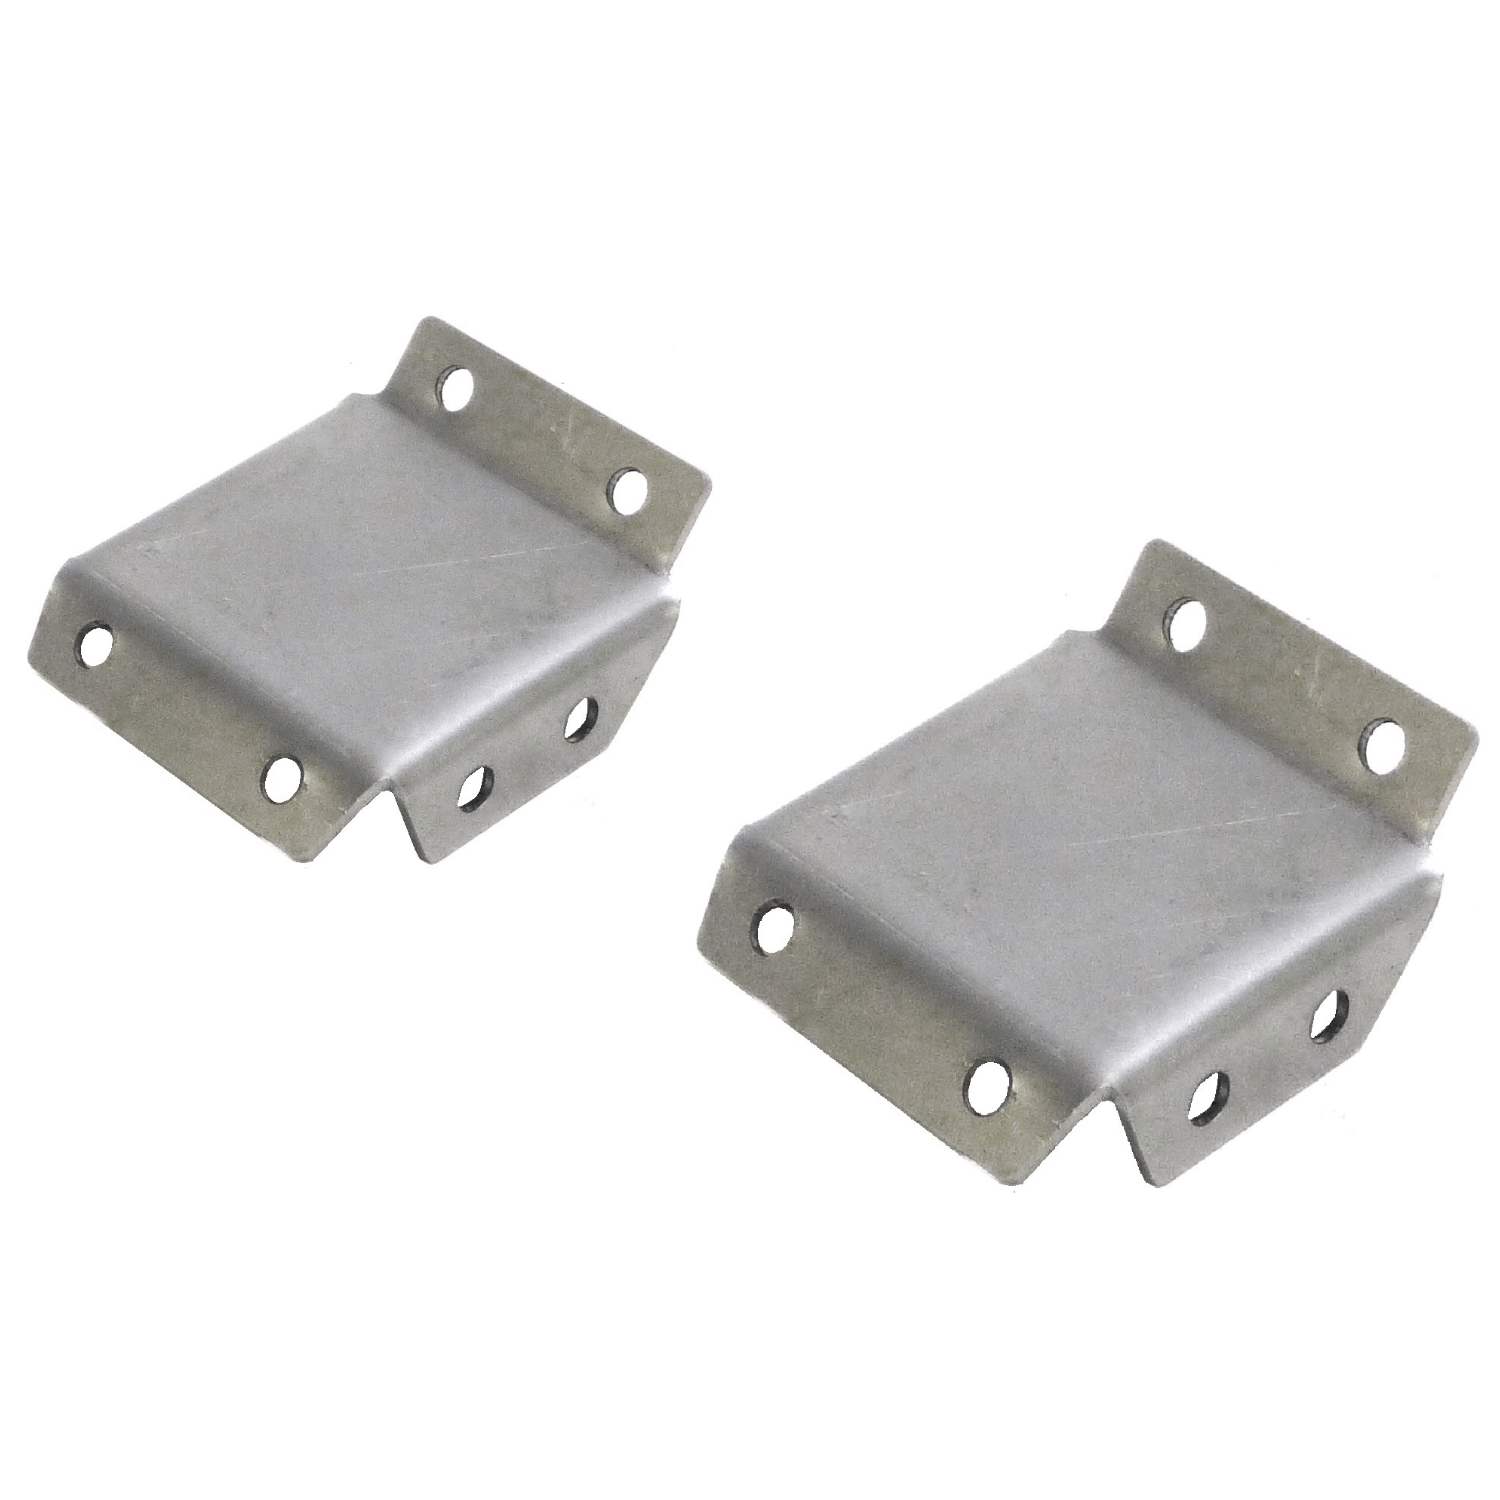 MK1 Cortina - Ford Zetec To Mazda Gearbox Chassis Rail Blanking Plates (MX5-010)